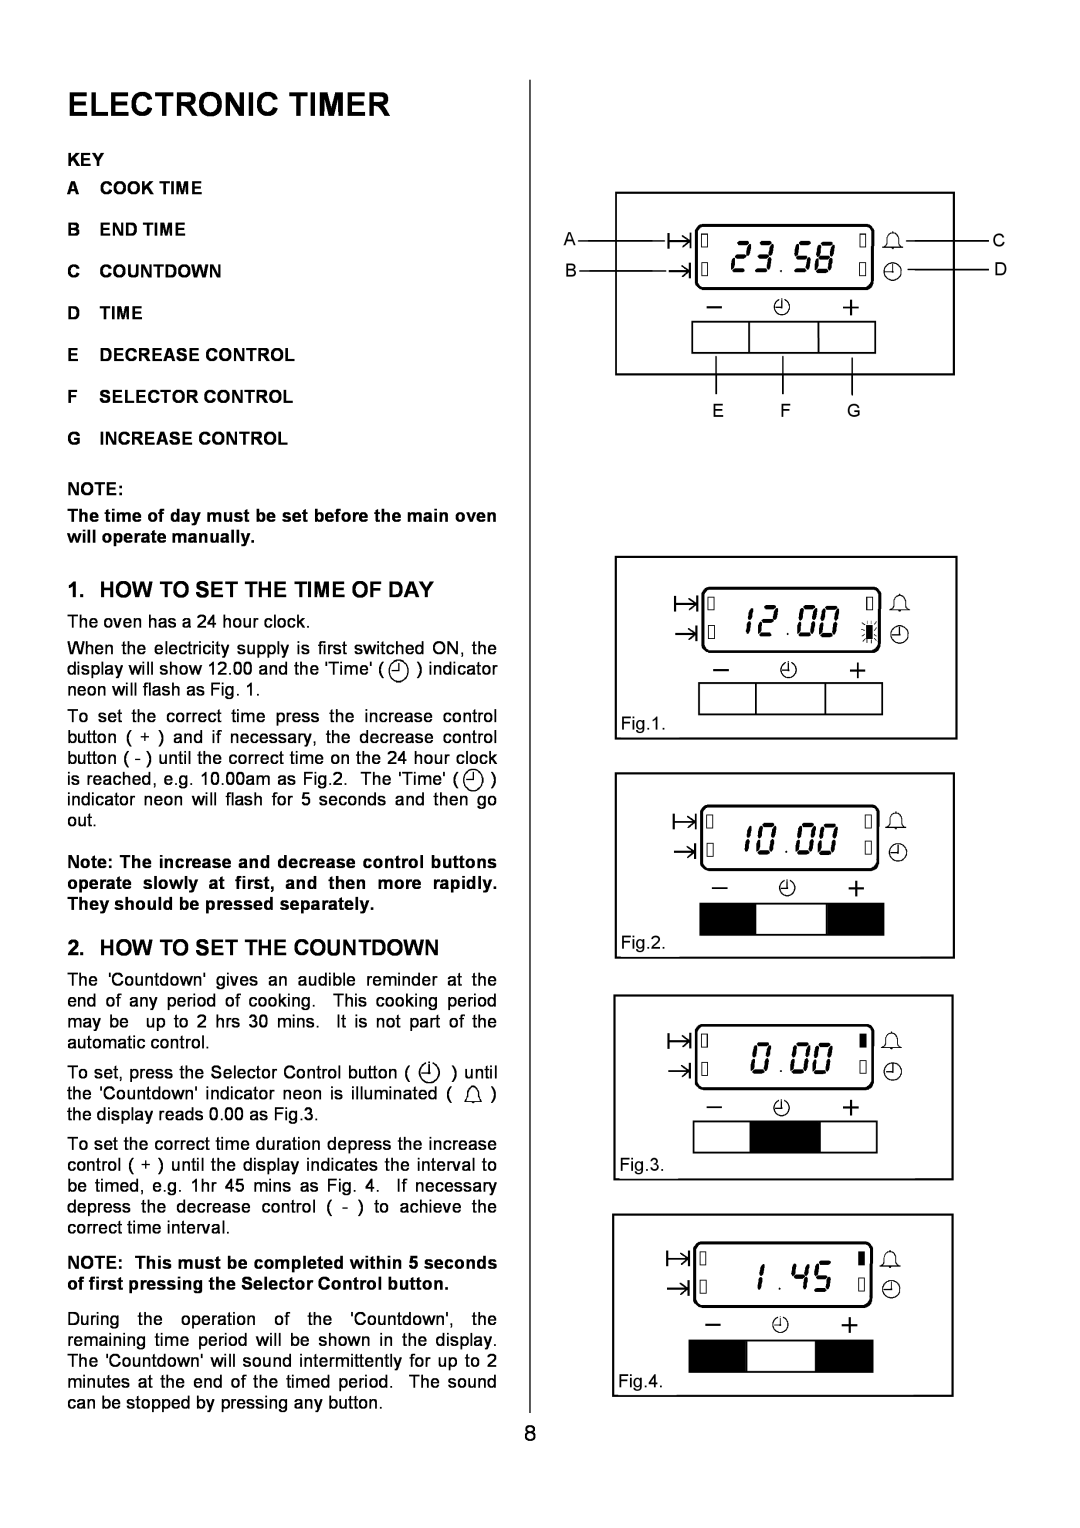 Electrolux U7101-4 operating instructions Electronic Timer, How To Set The Time Of Day, How To Set The Countdown 